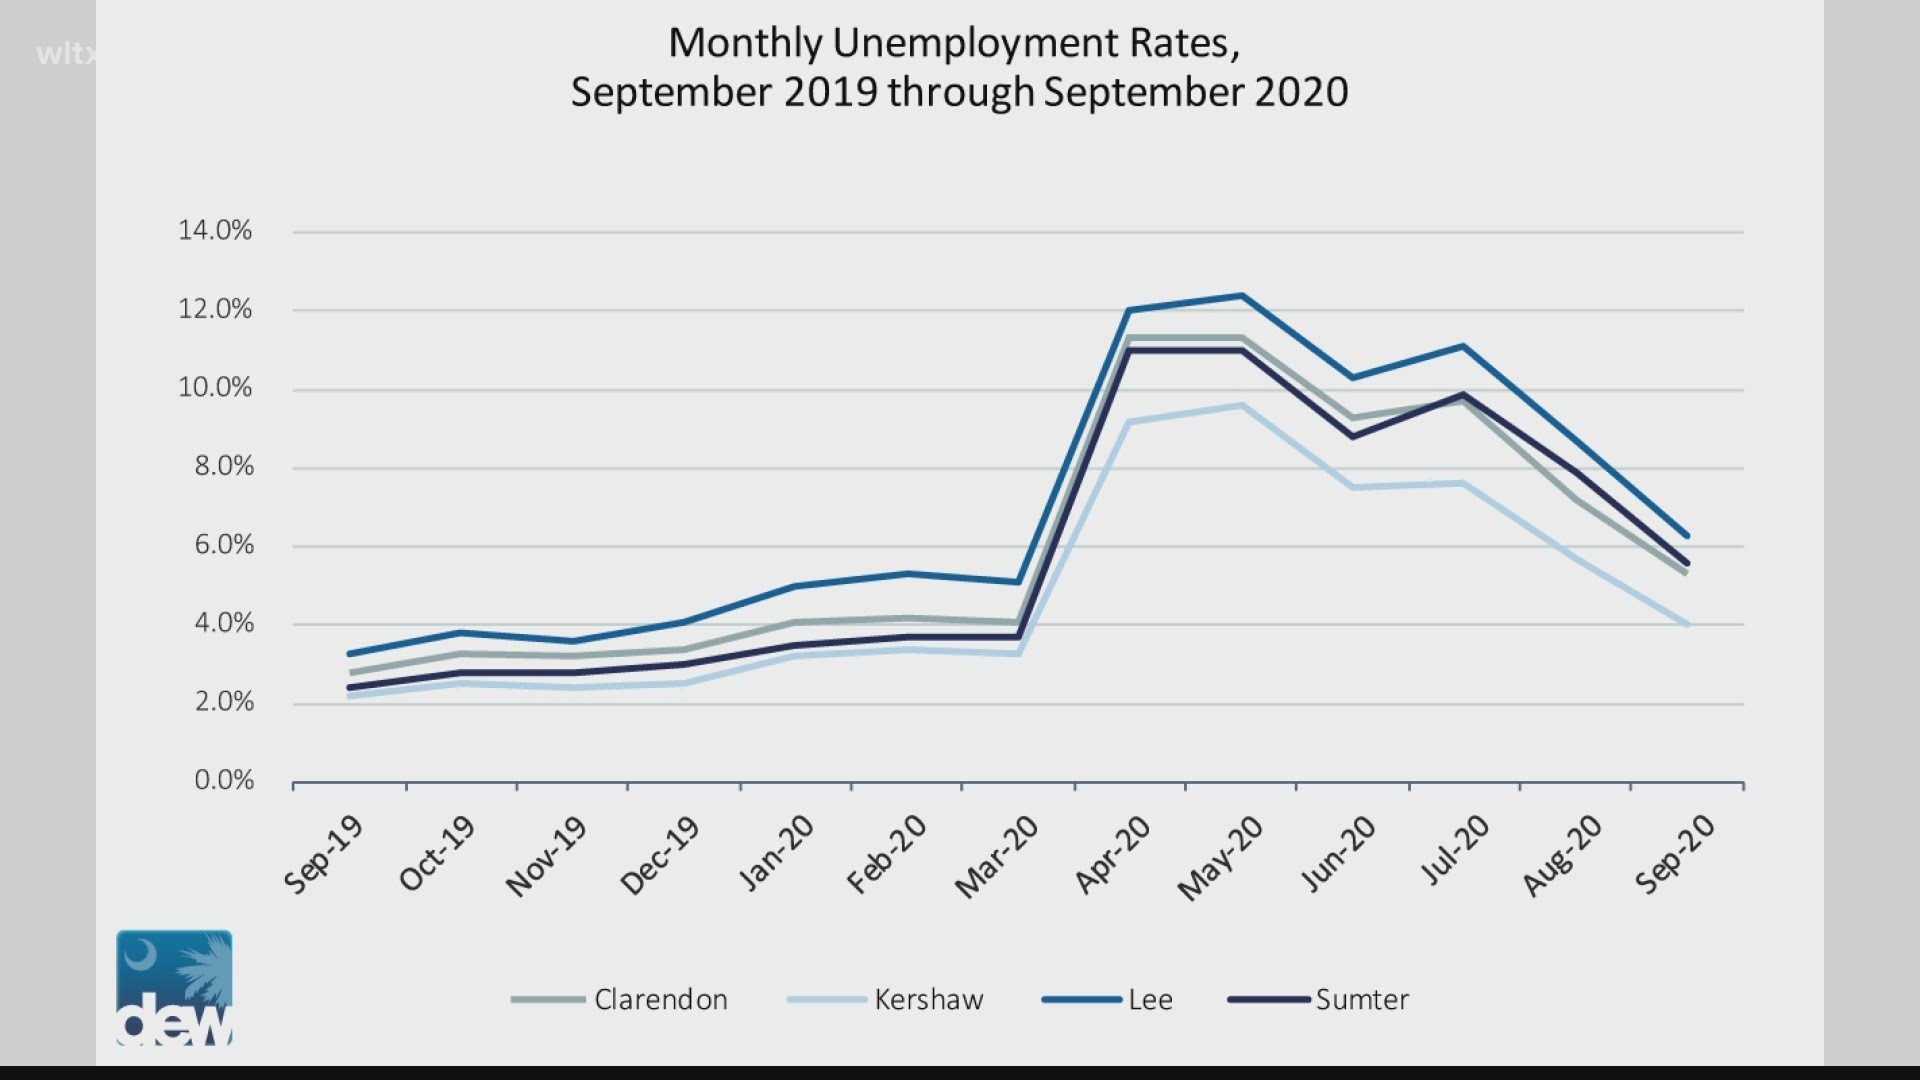 Brian Nottingham with the SC Department of Employment and Workforce has the latest on the state's unemployment situation.